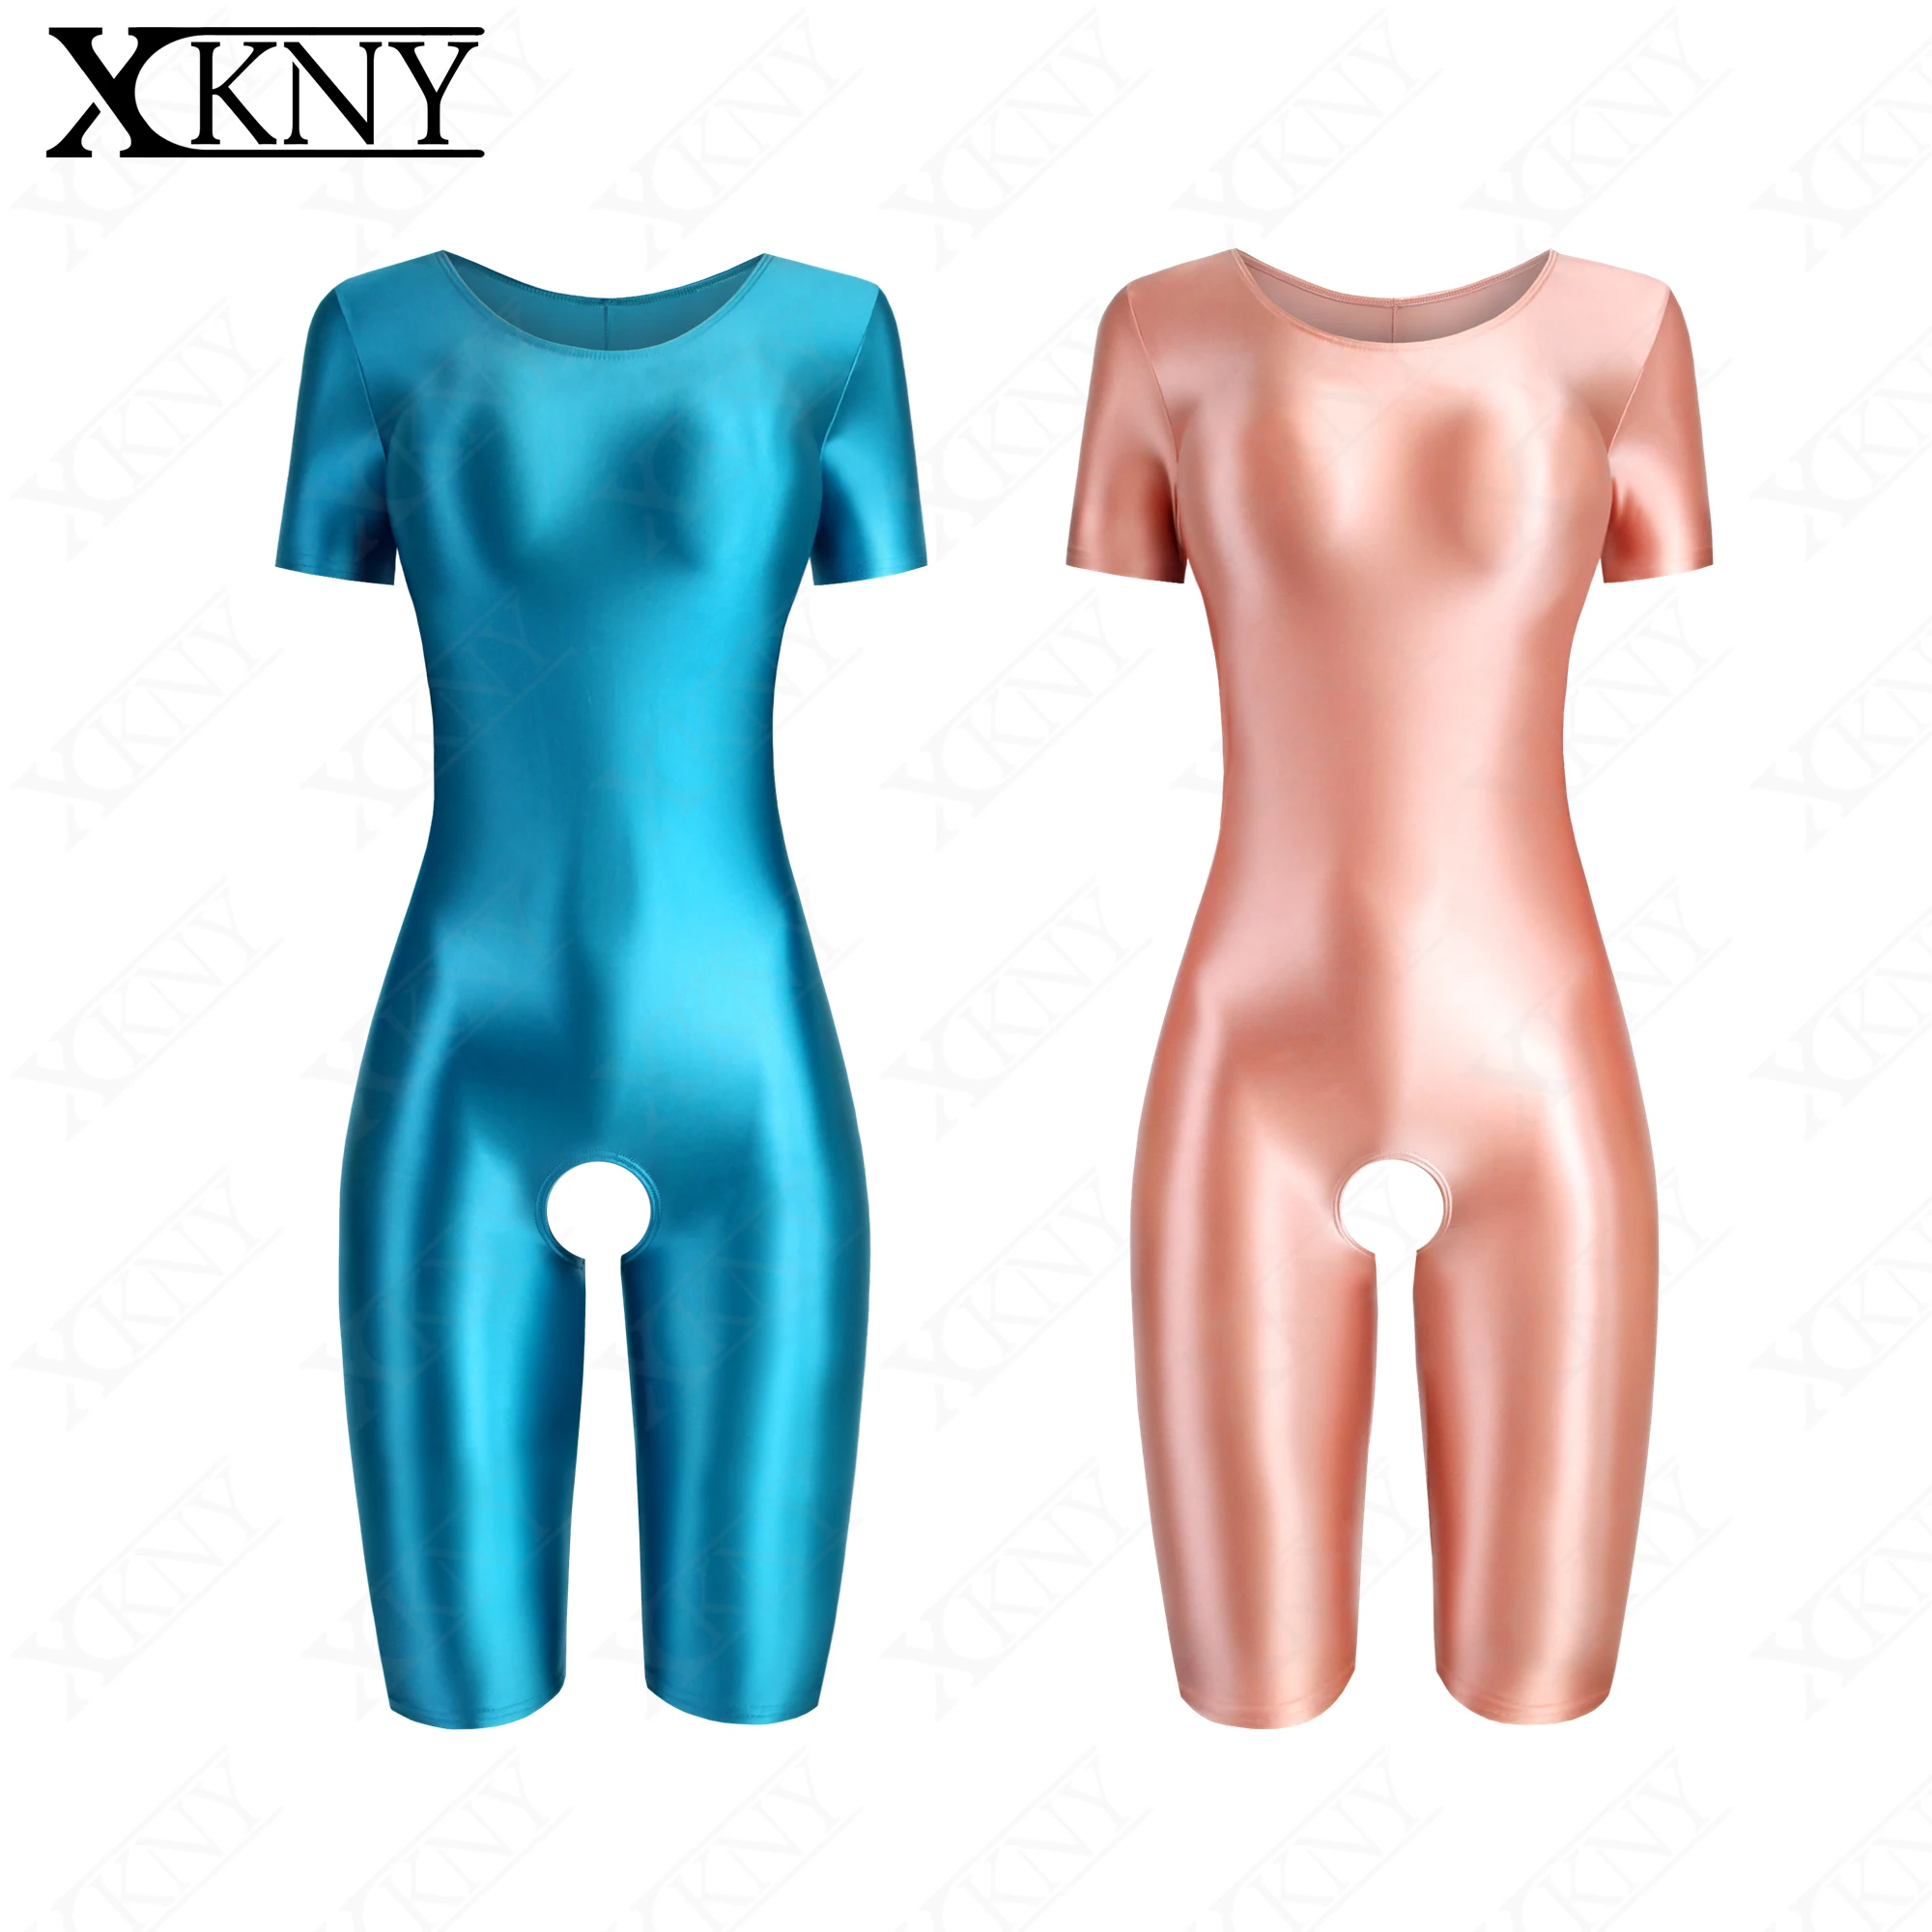 

XCKNY satin glossy tights oily silky round neck Open crotch suit Yoga Leotards short sleeved short pants tights unisex swimsuit